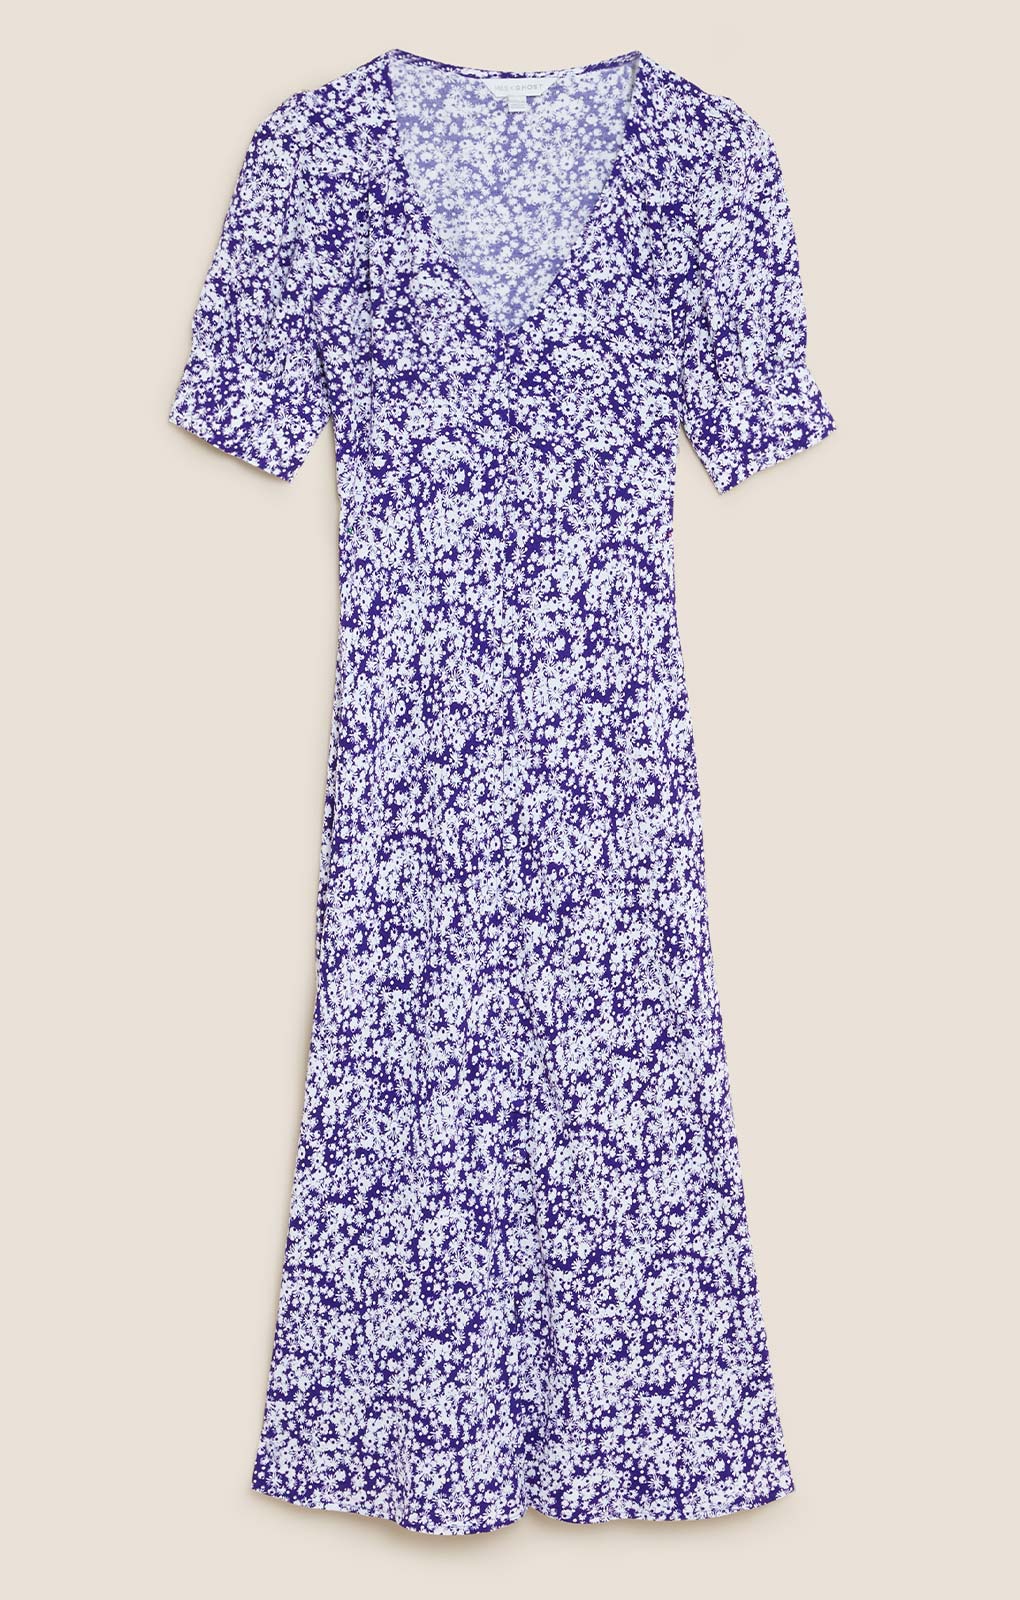 M&S X Ghost Ditsy Button Detail Dress product image